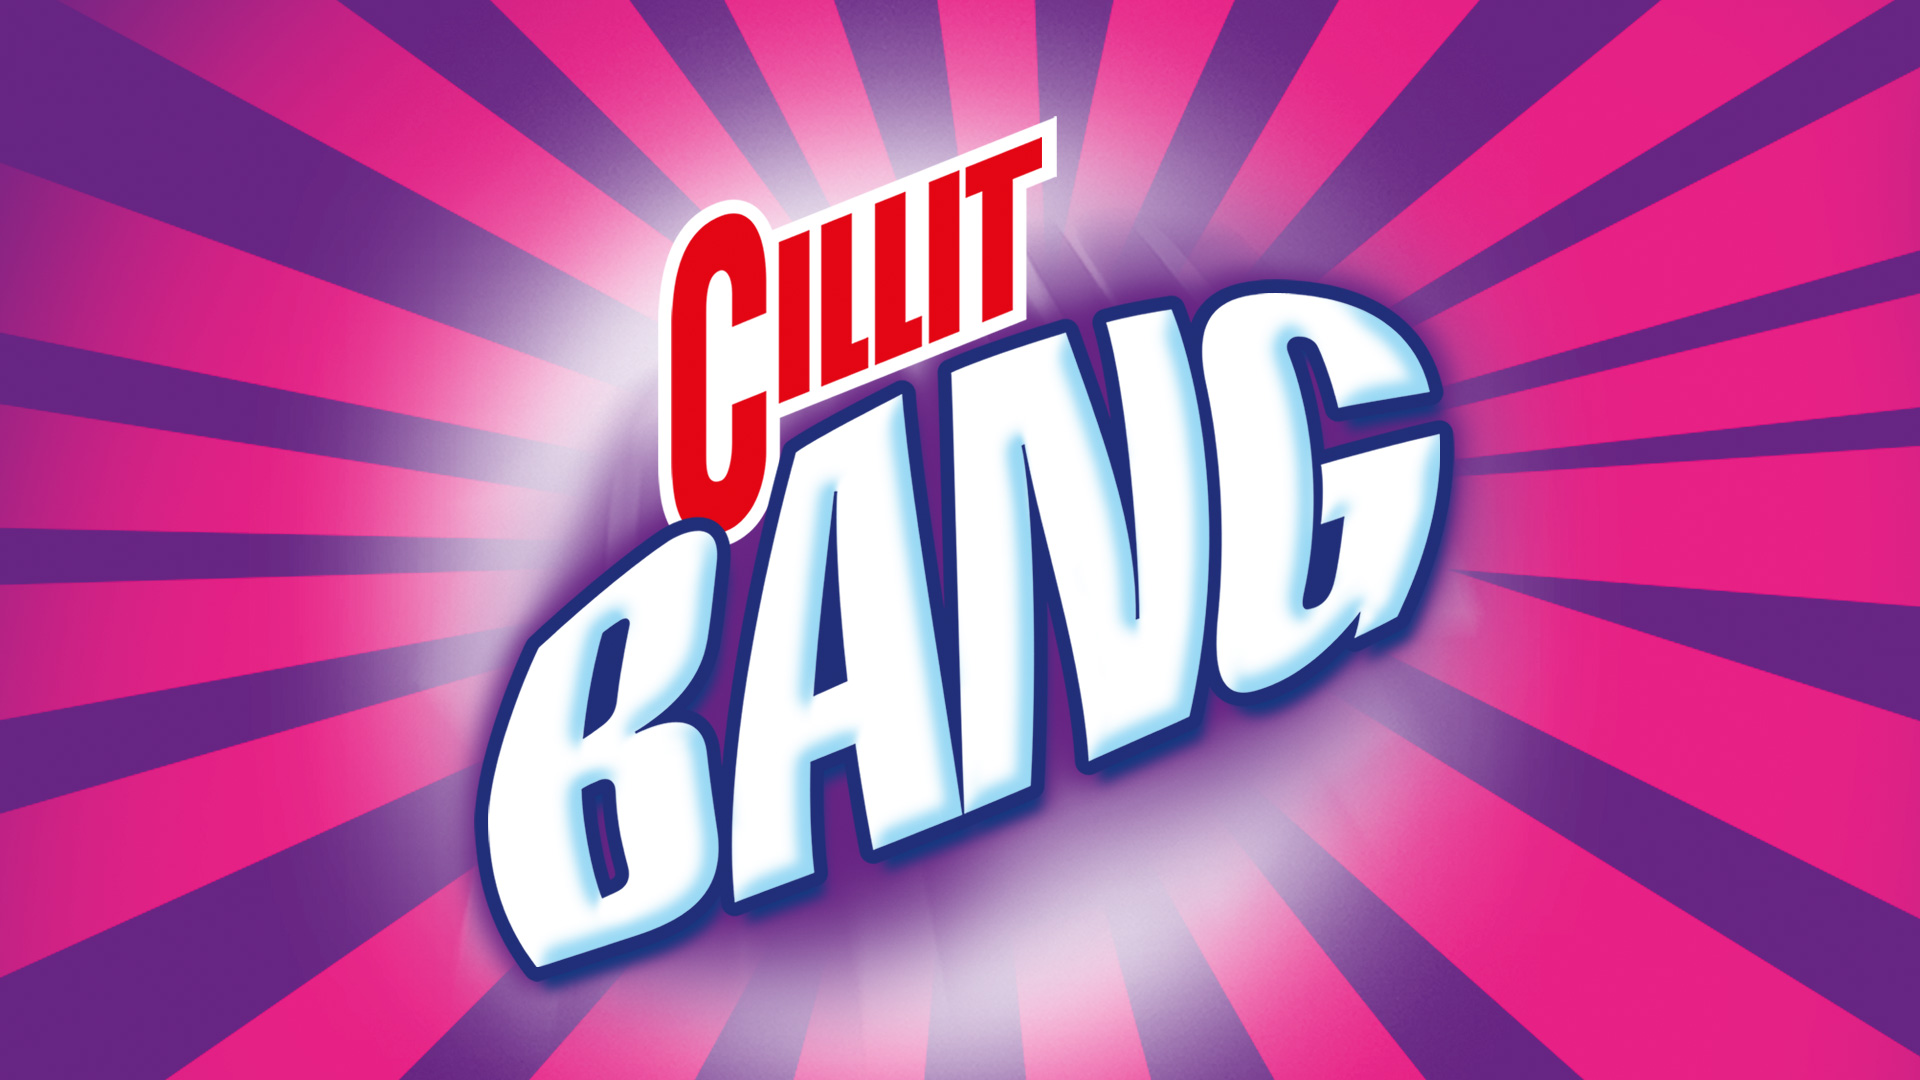 Cillit Bang GB - How amazing is the NEW Cillit Bang design